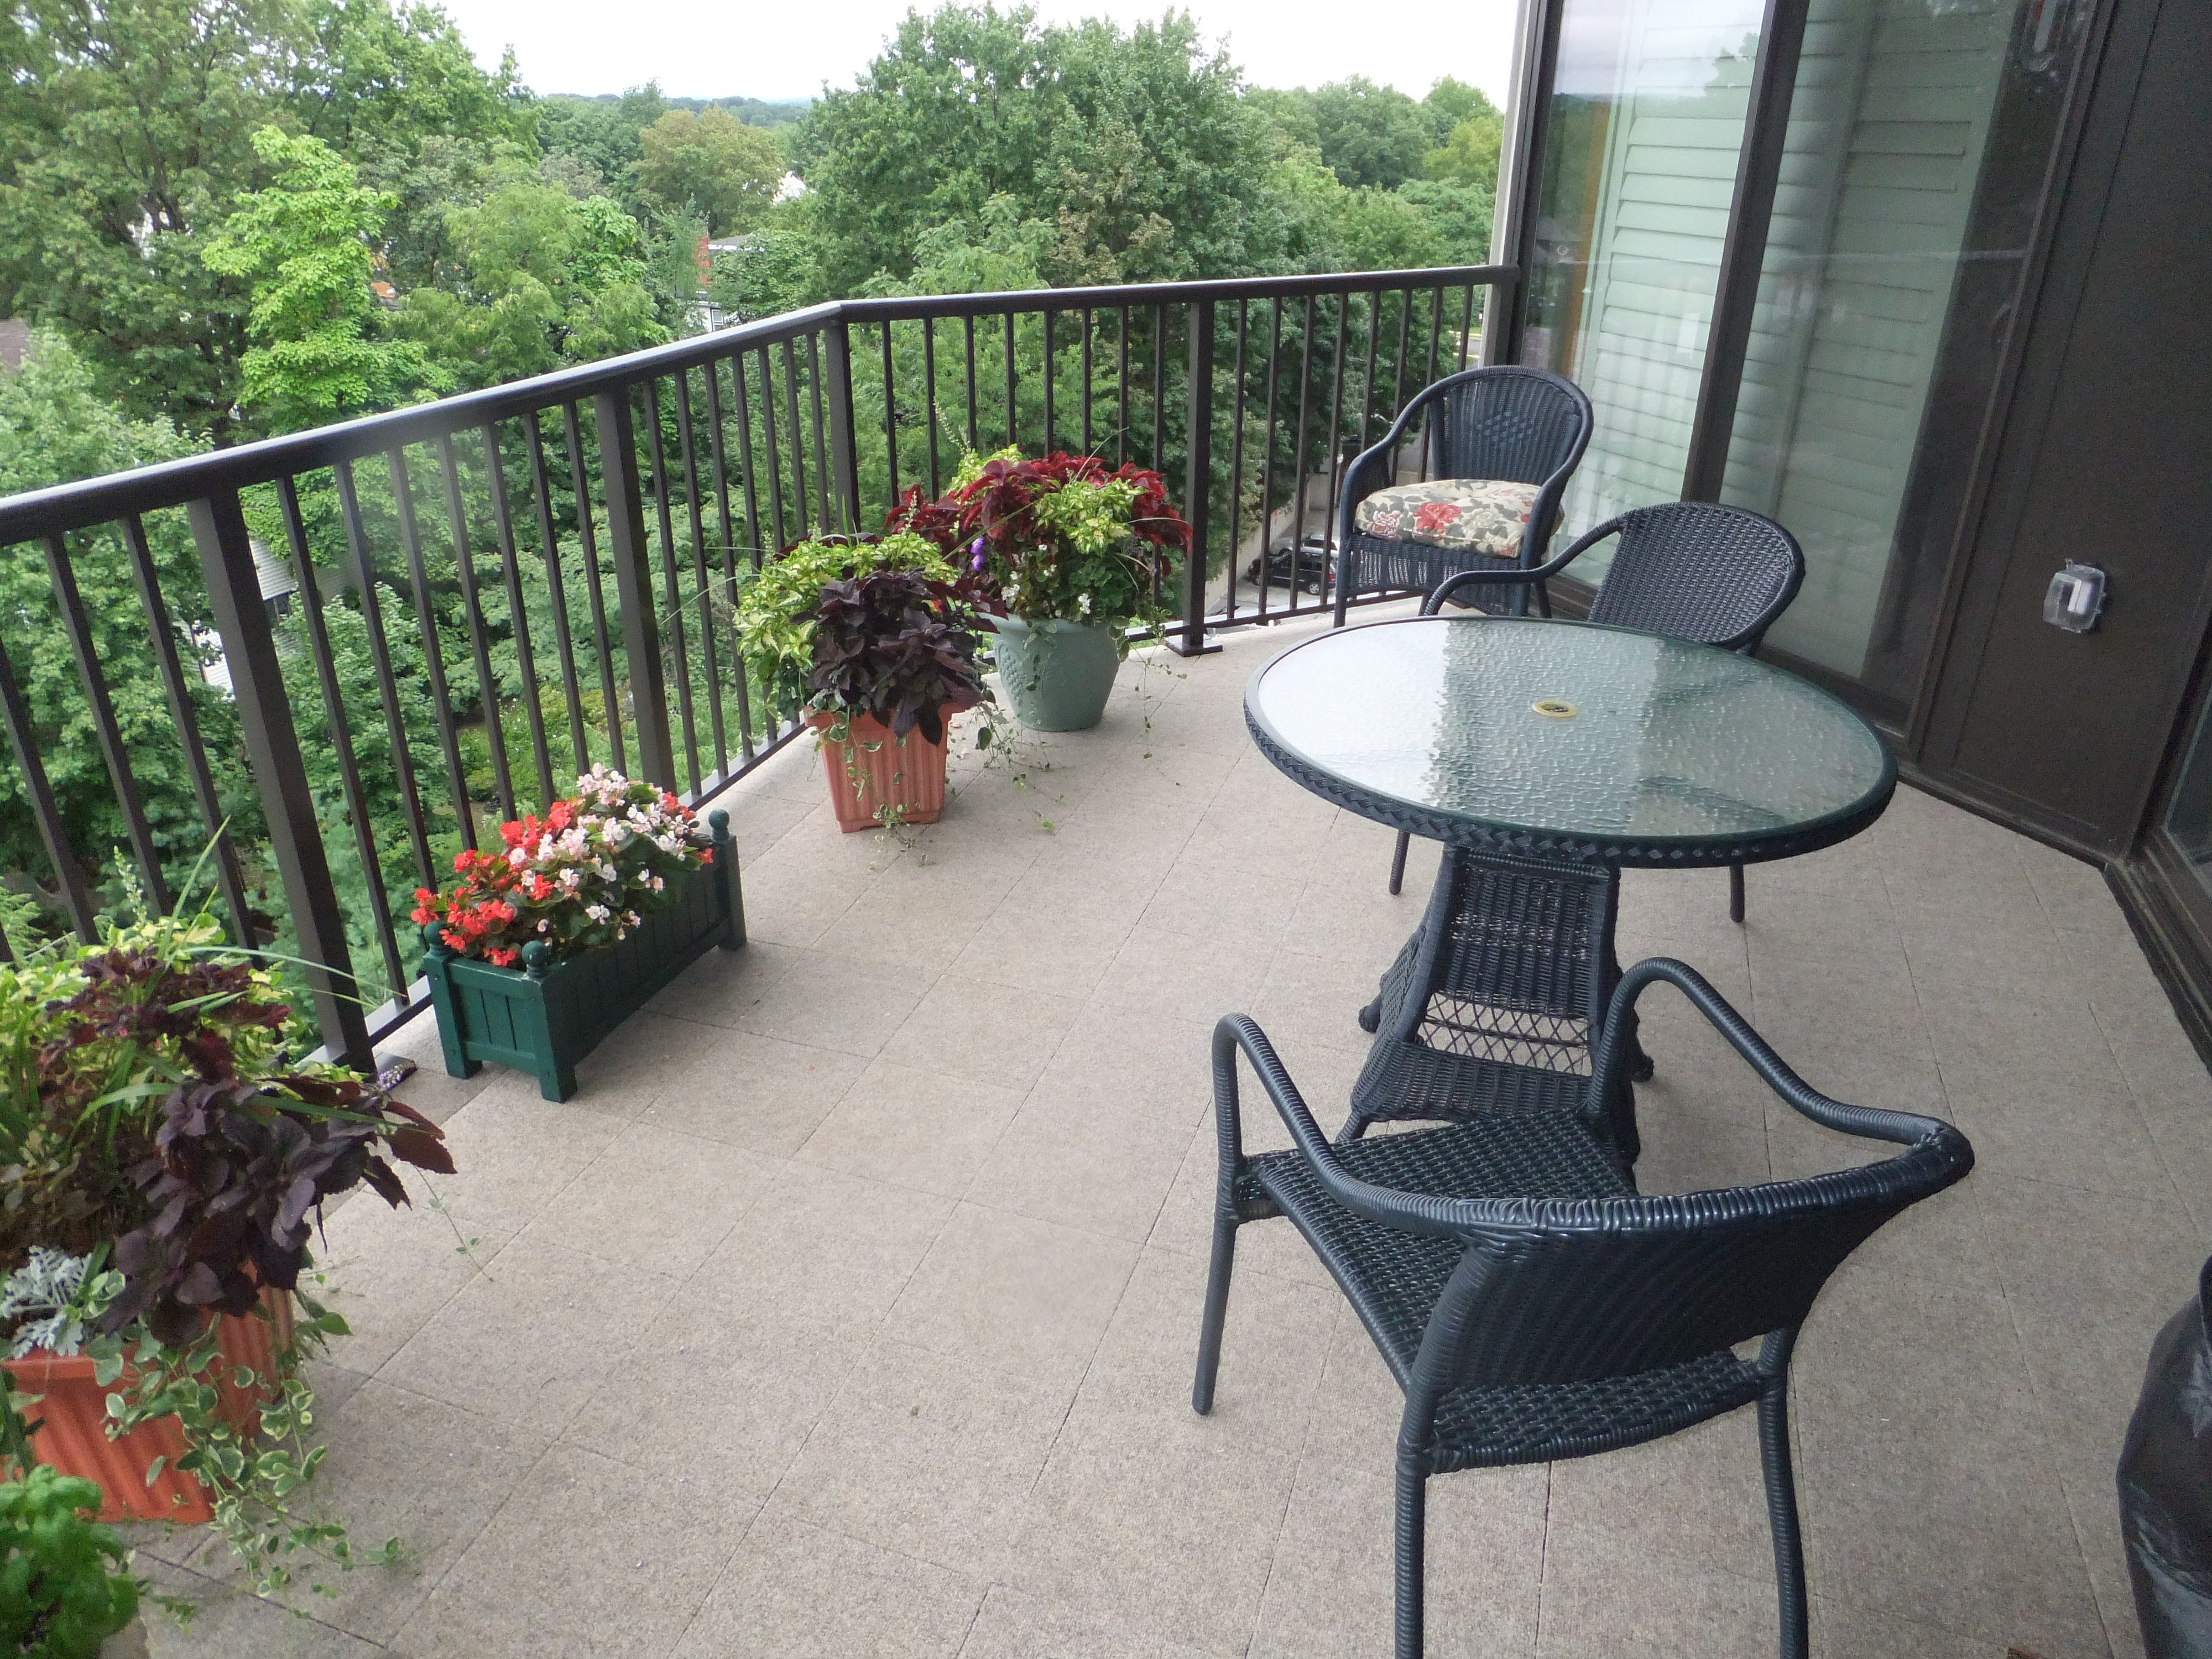 New System Allows Carpet on Balconies - Coverdeck Systems